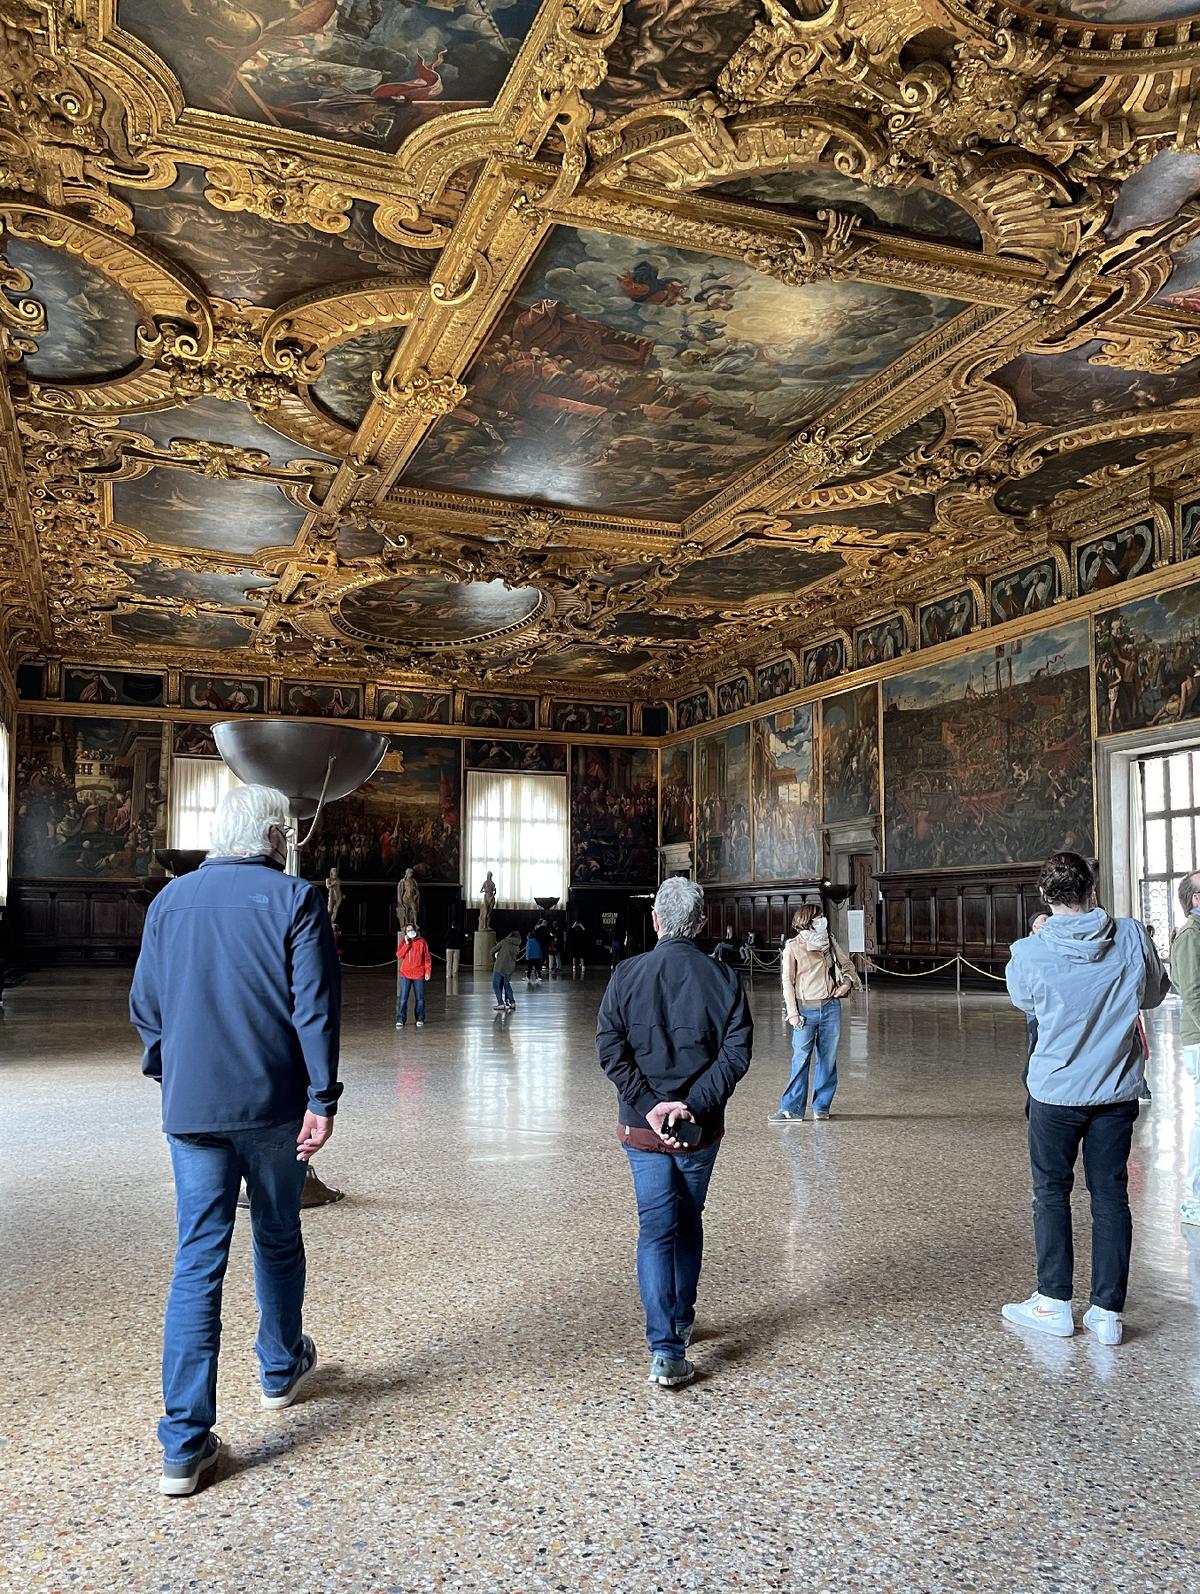 Guests absorb the impact of powerful gold friezes above the Great Council's meeting room in Venice's famed Doge's Palace. (Photo courtesy of Lesley Sauls Frederikson.)